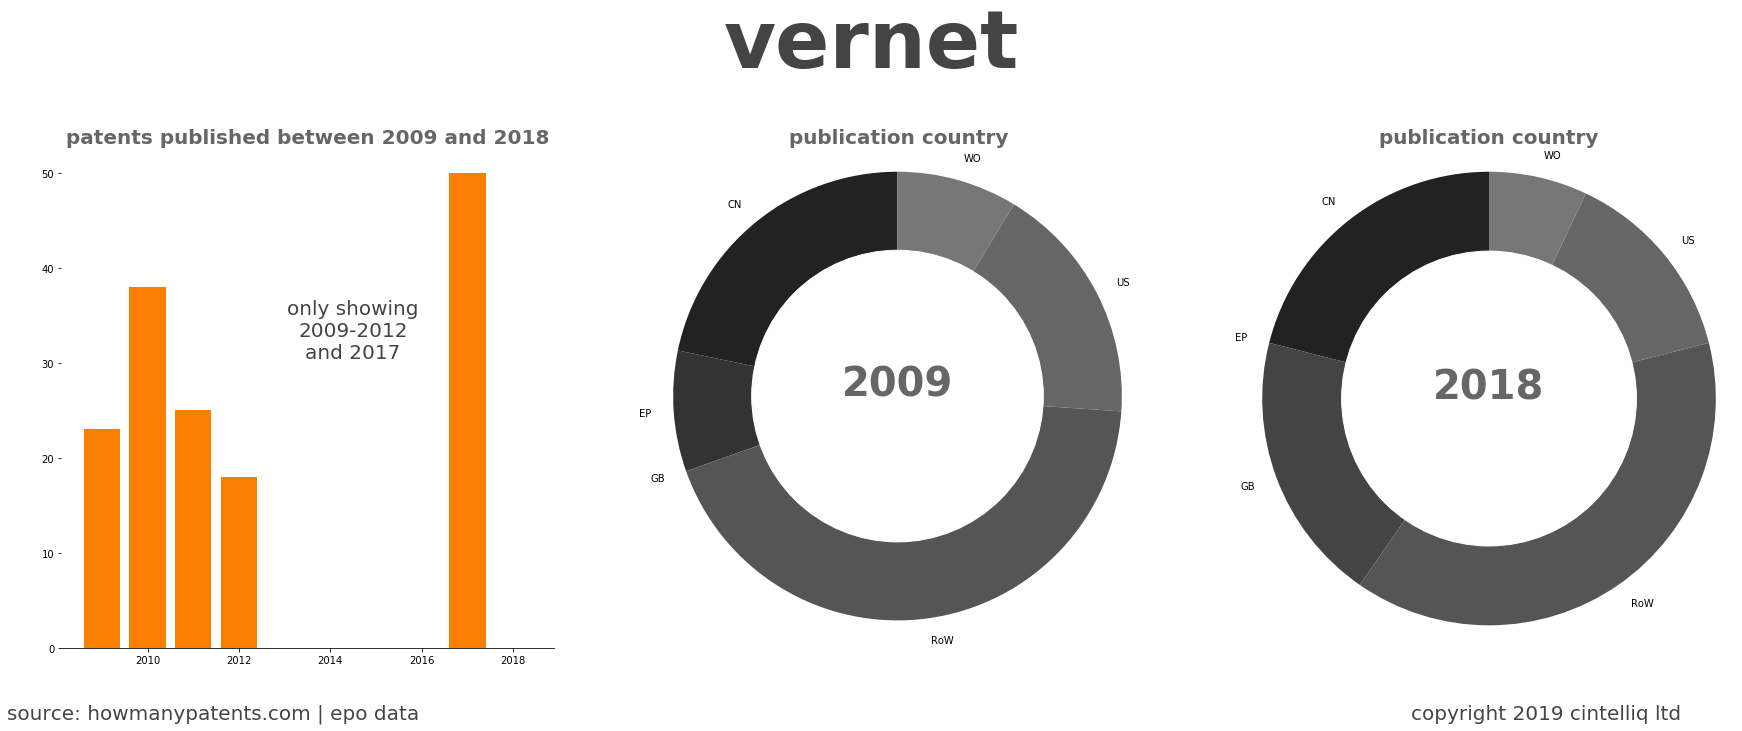 summary of patents for Vernet